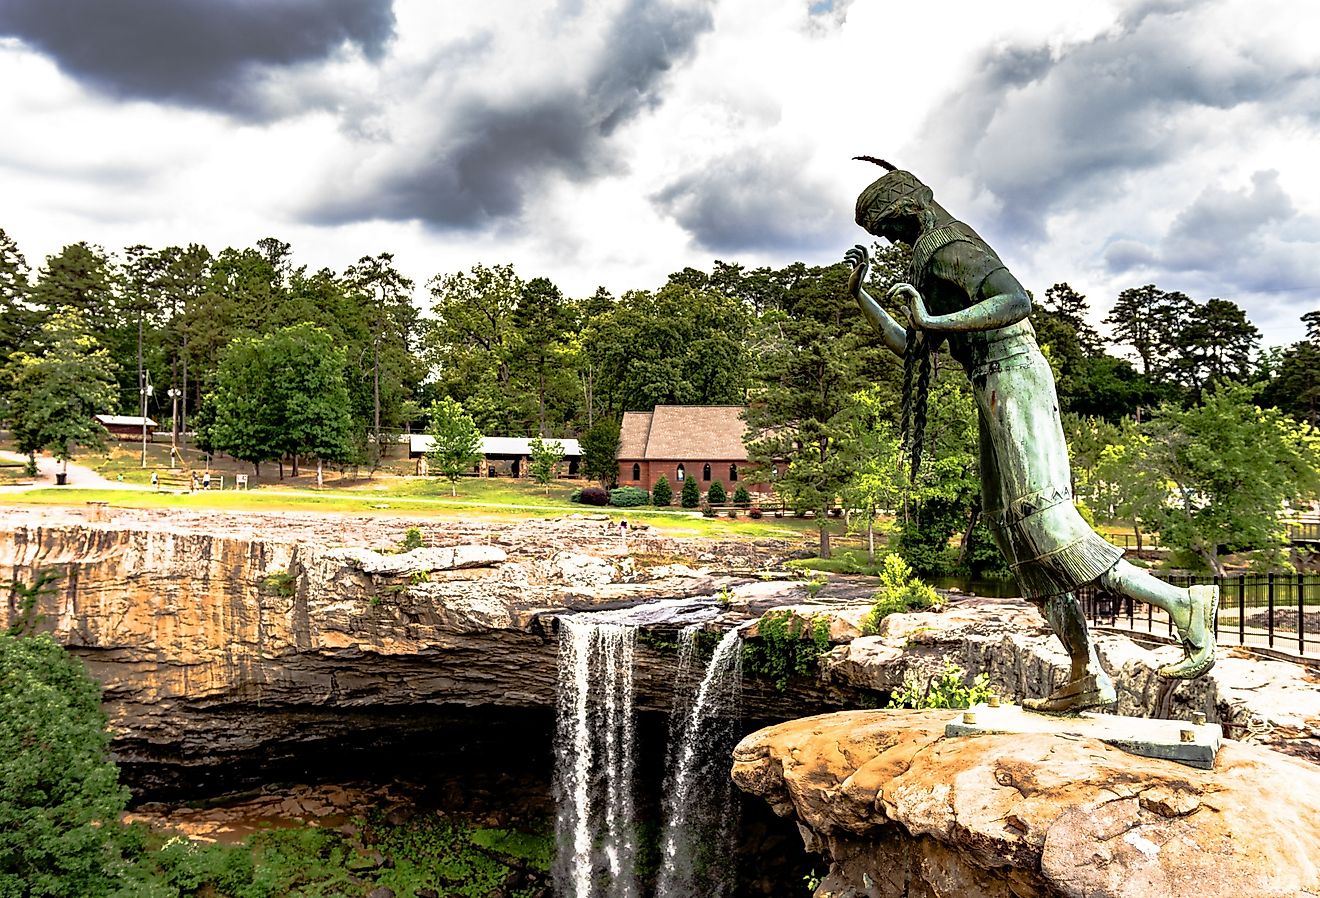  The bronze statue of a young Cherokee woman named Noccalula, who legend says plunged to her death at this point with Noccalula Falls in the background. Image credit JNix via Shutterstock.